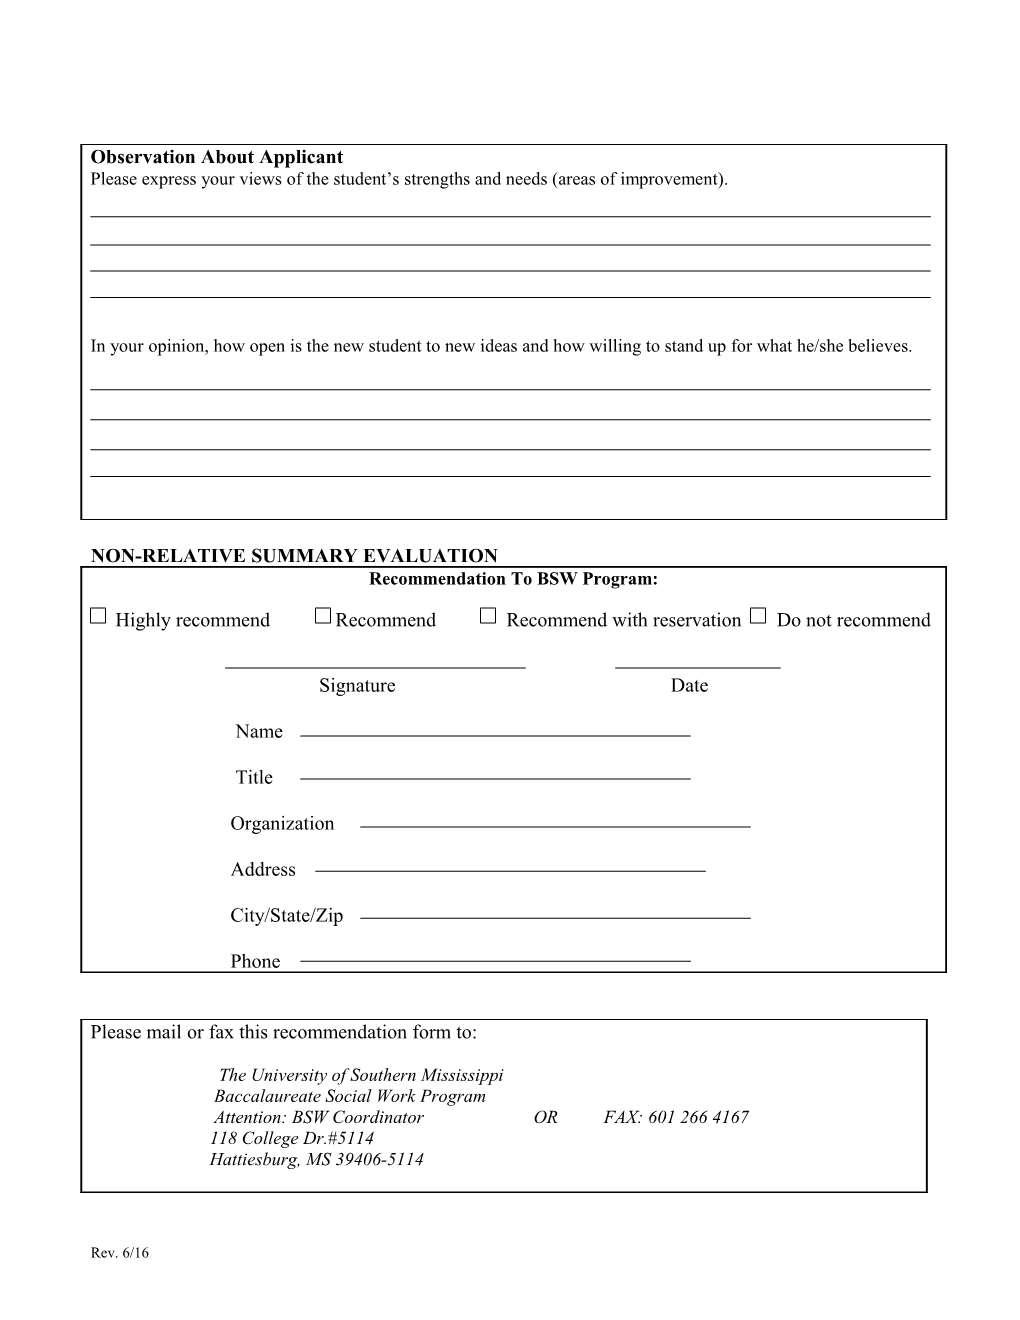 Recommendation Form s1